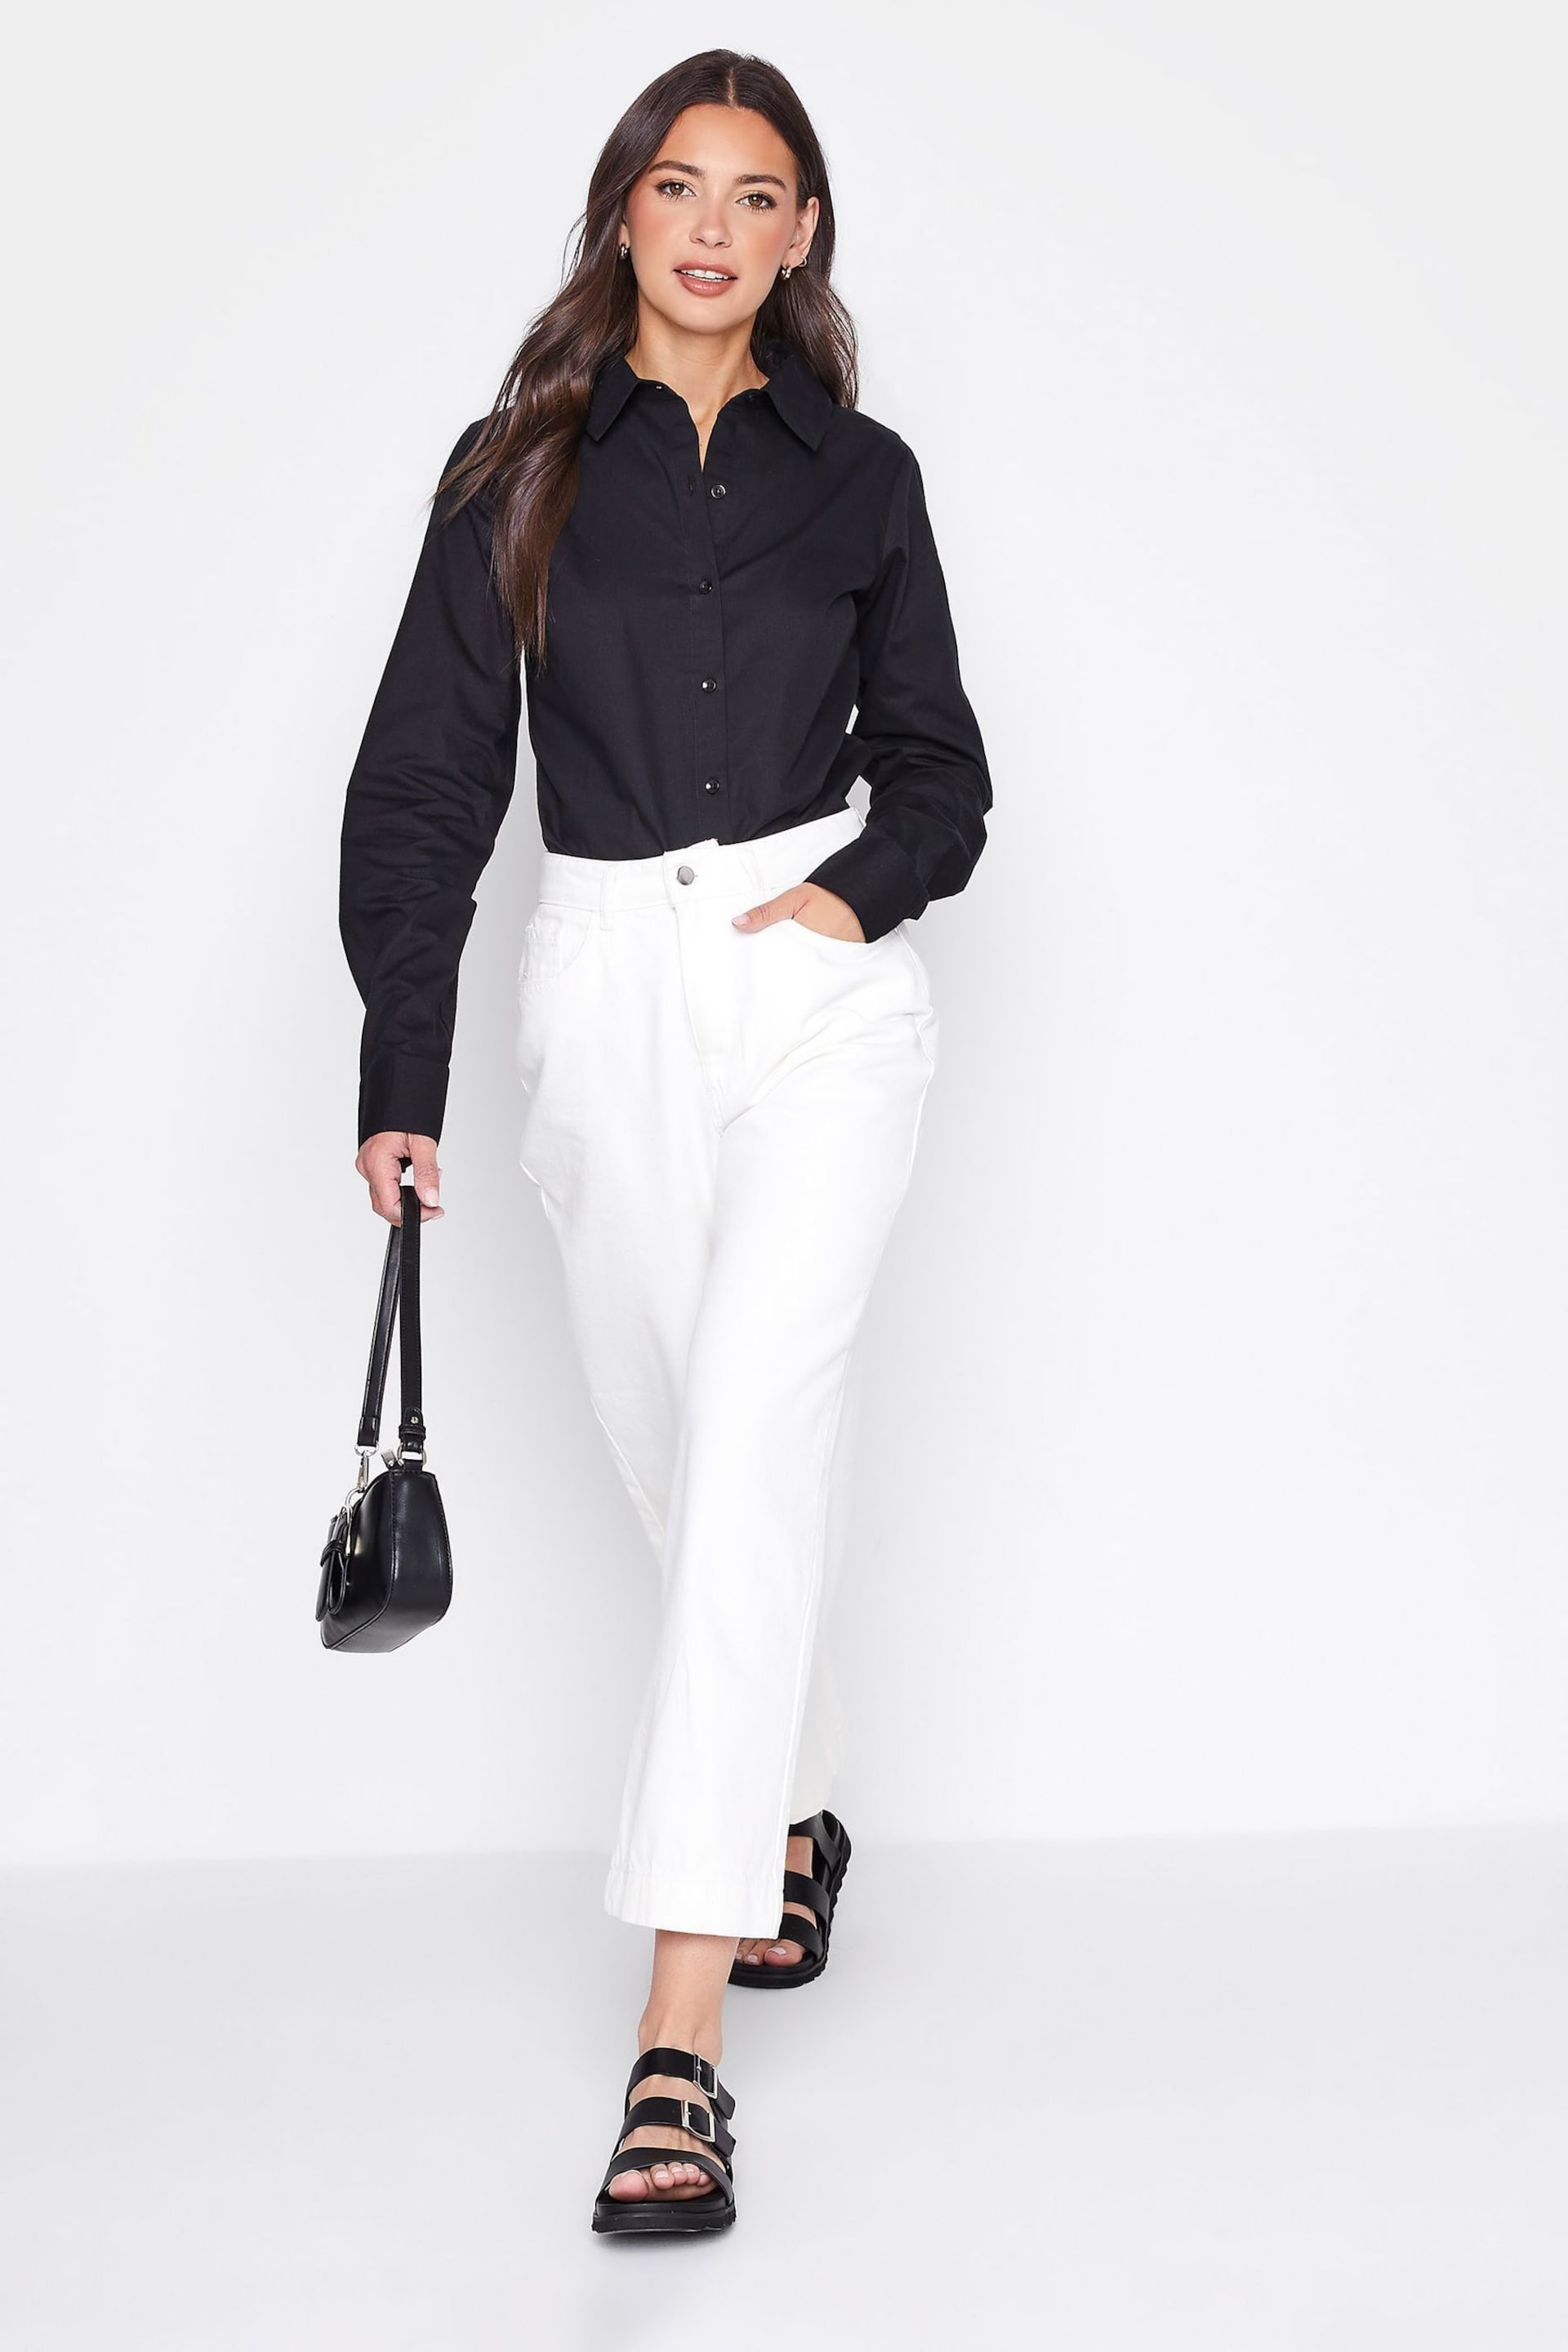 Long Tall Sally Black Fitted Cotton Shirt - Image 3 of 4